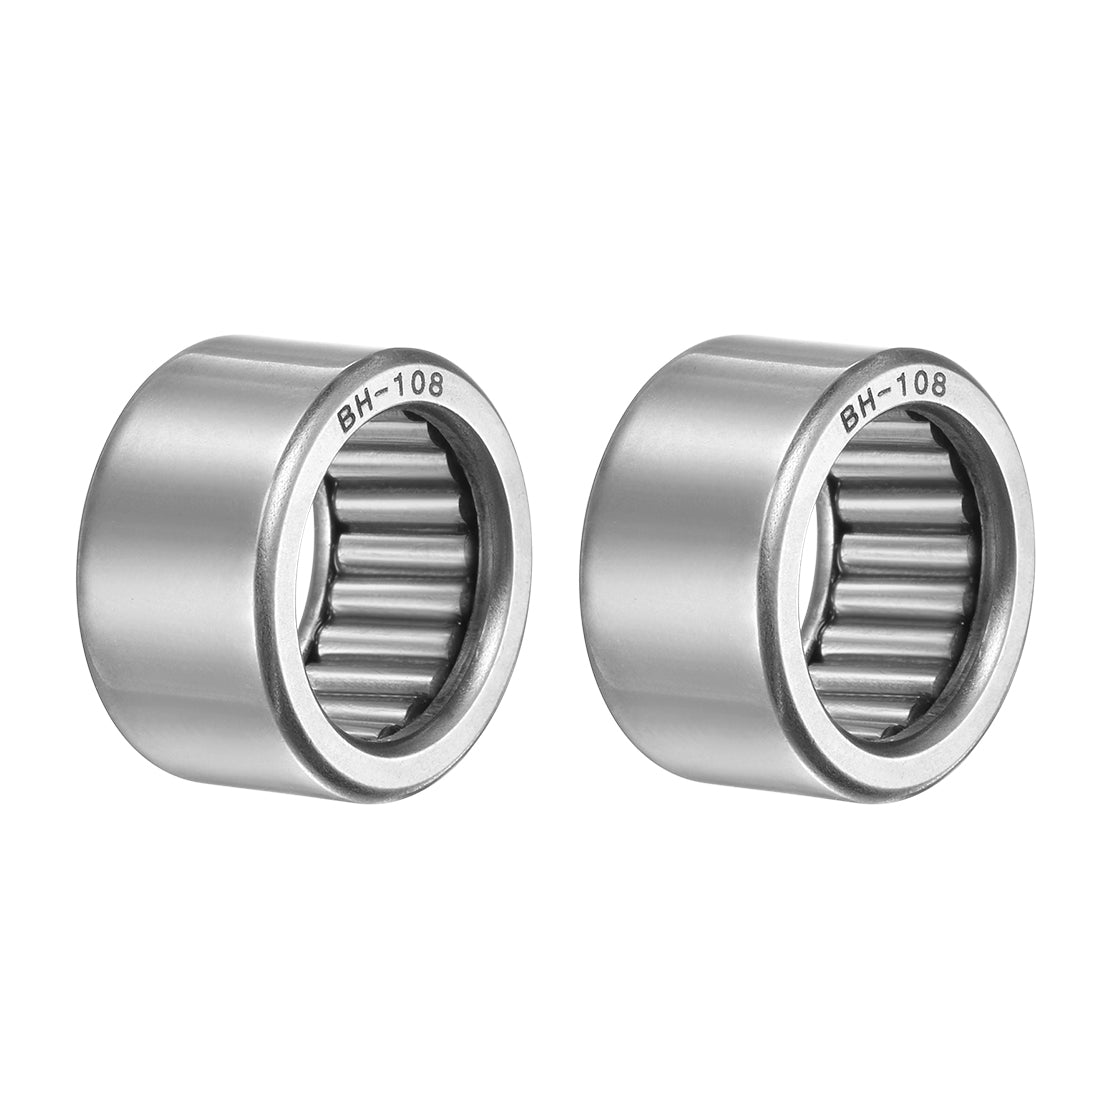 uxcell Uxcell BH912 Needle Roller Bearings 9/16"x13/16"x3/4" Open Full Complement 2pcs